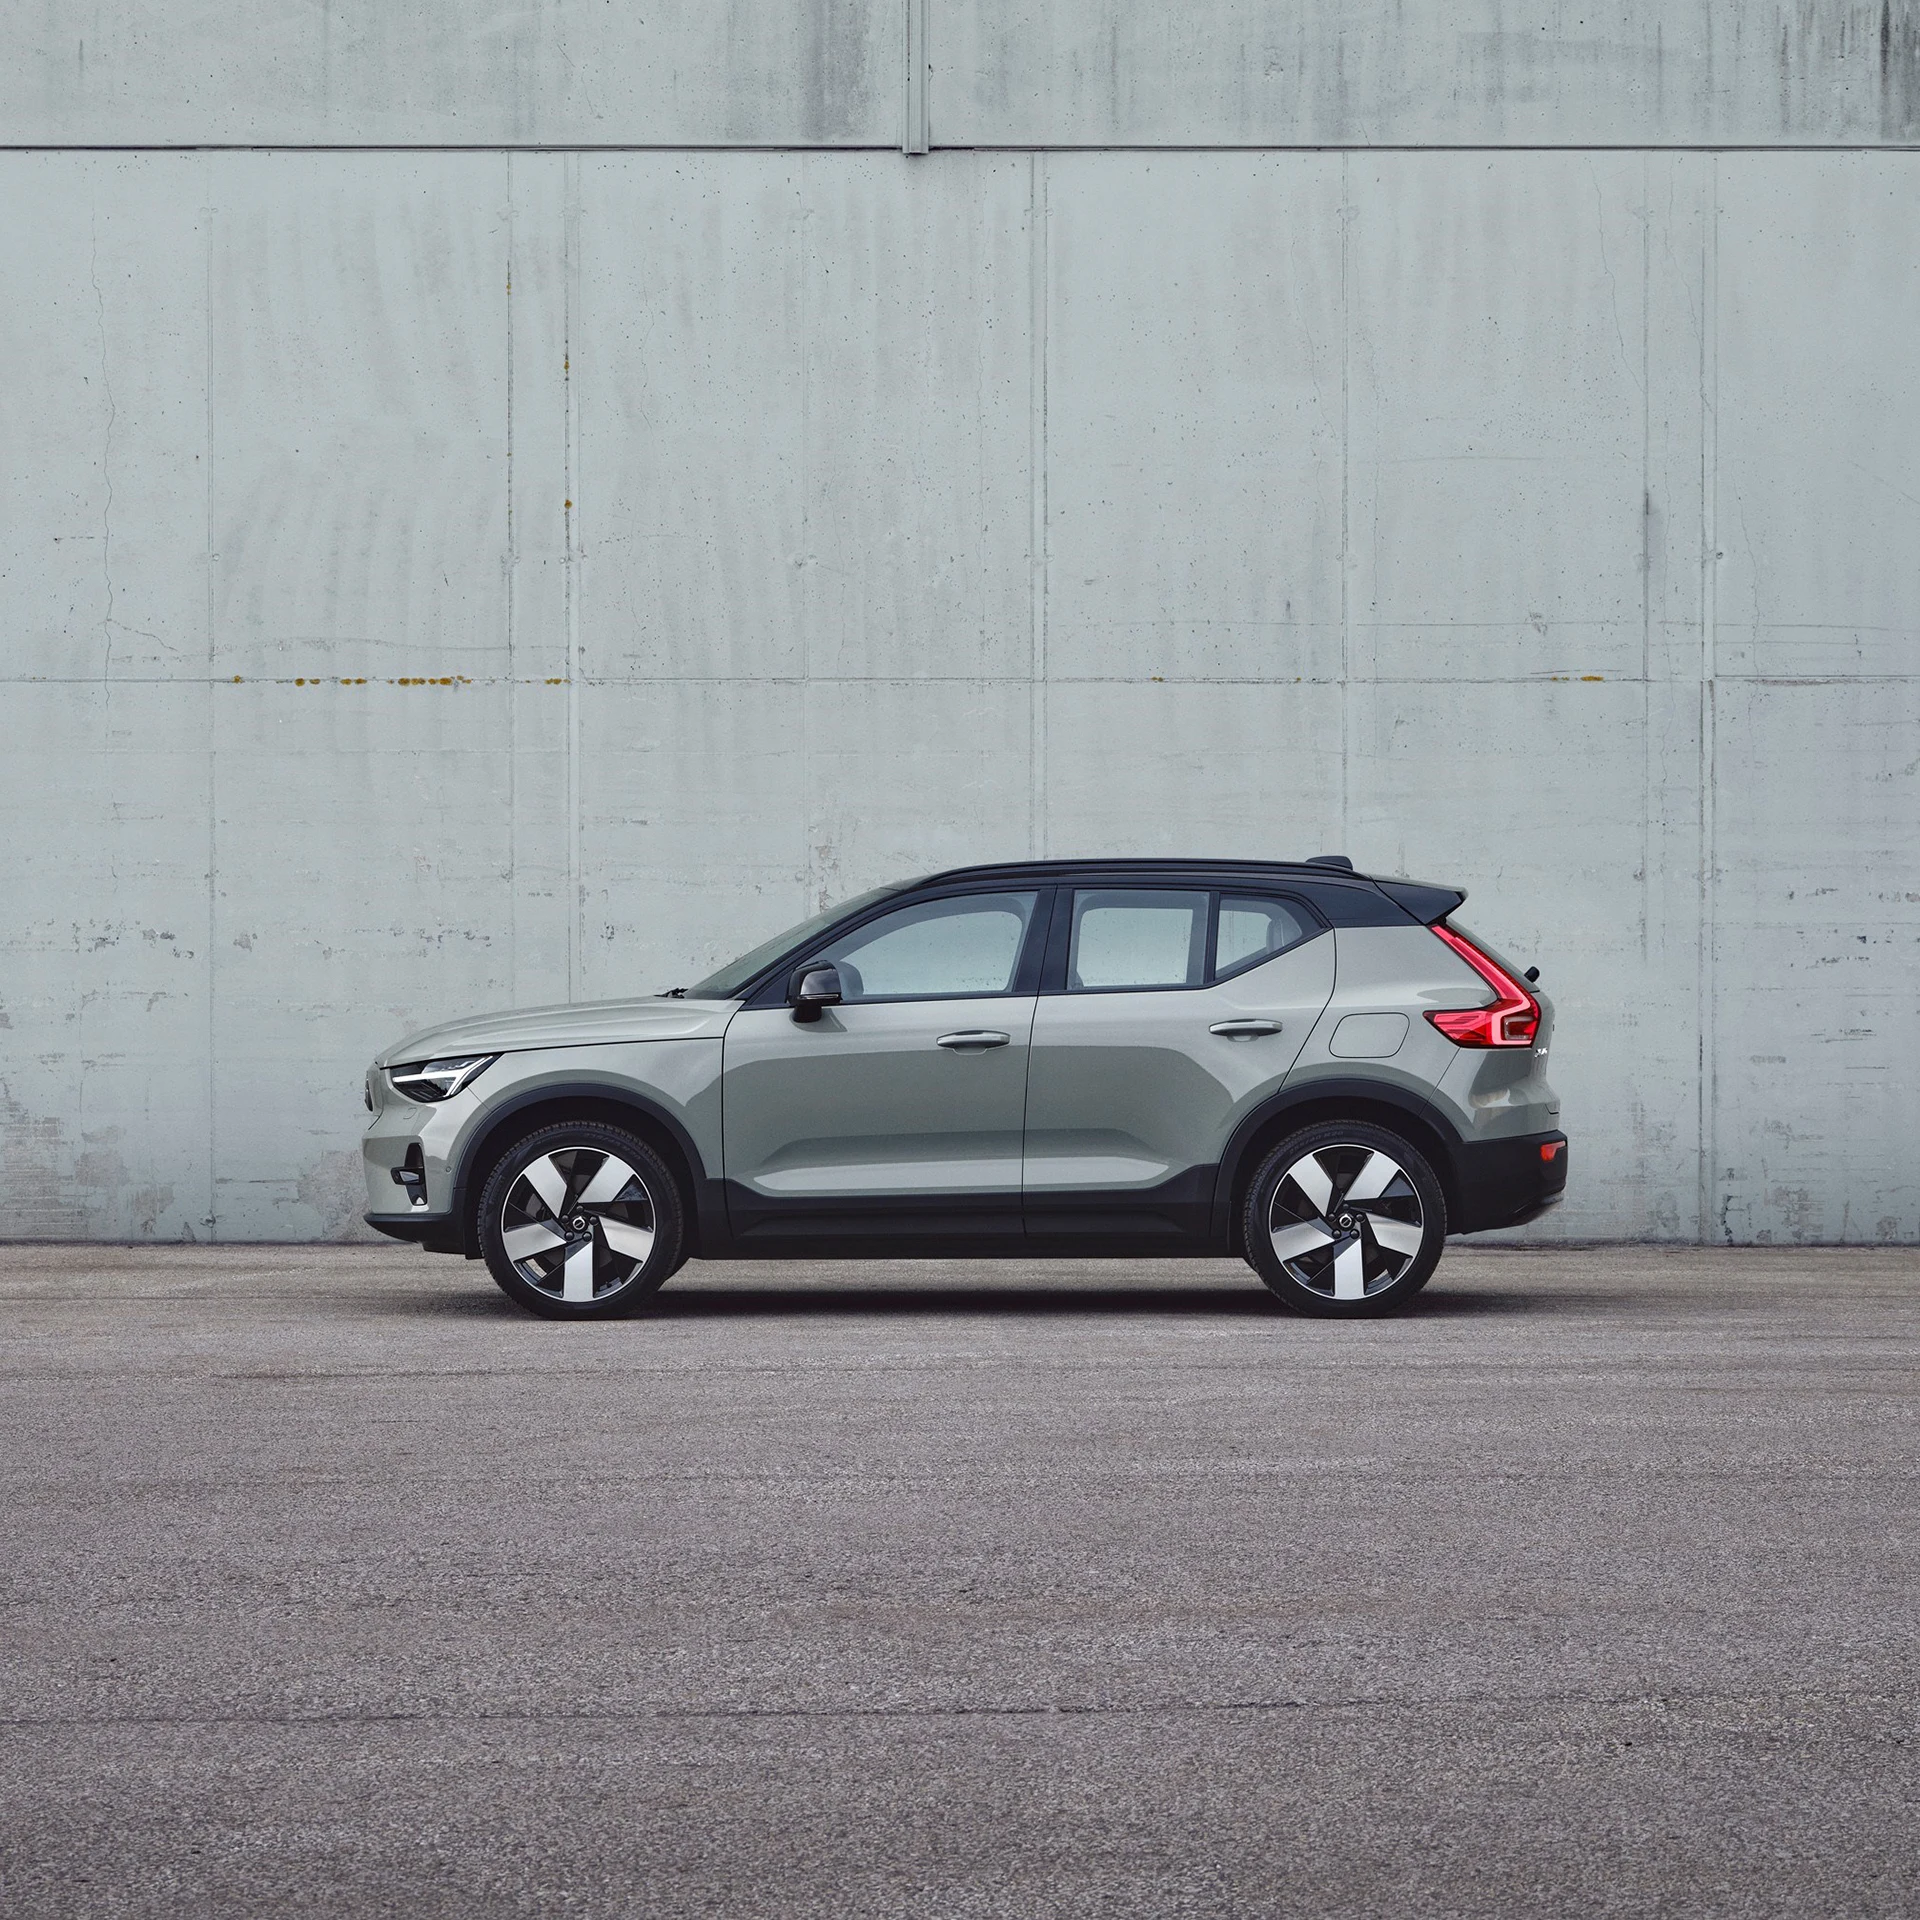 The side profile of a Sage Green Volvo XC40 Recharge SUV plugged into charging station